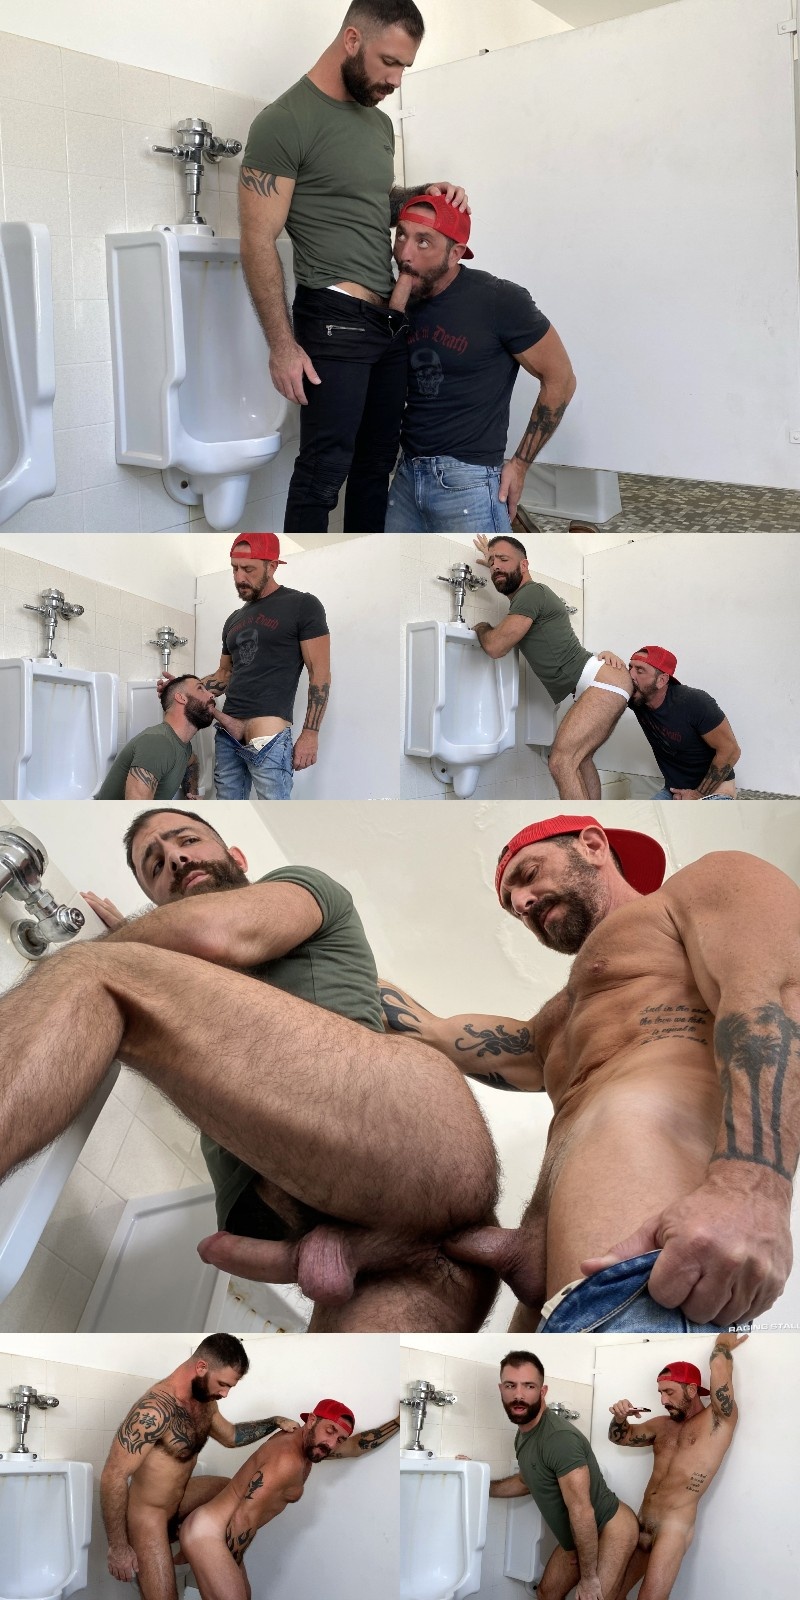 Hairy Lovers Fuck Each Other is Rest Stop Toilet